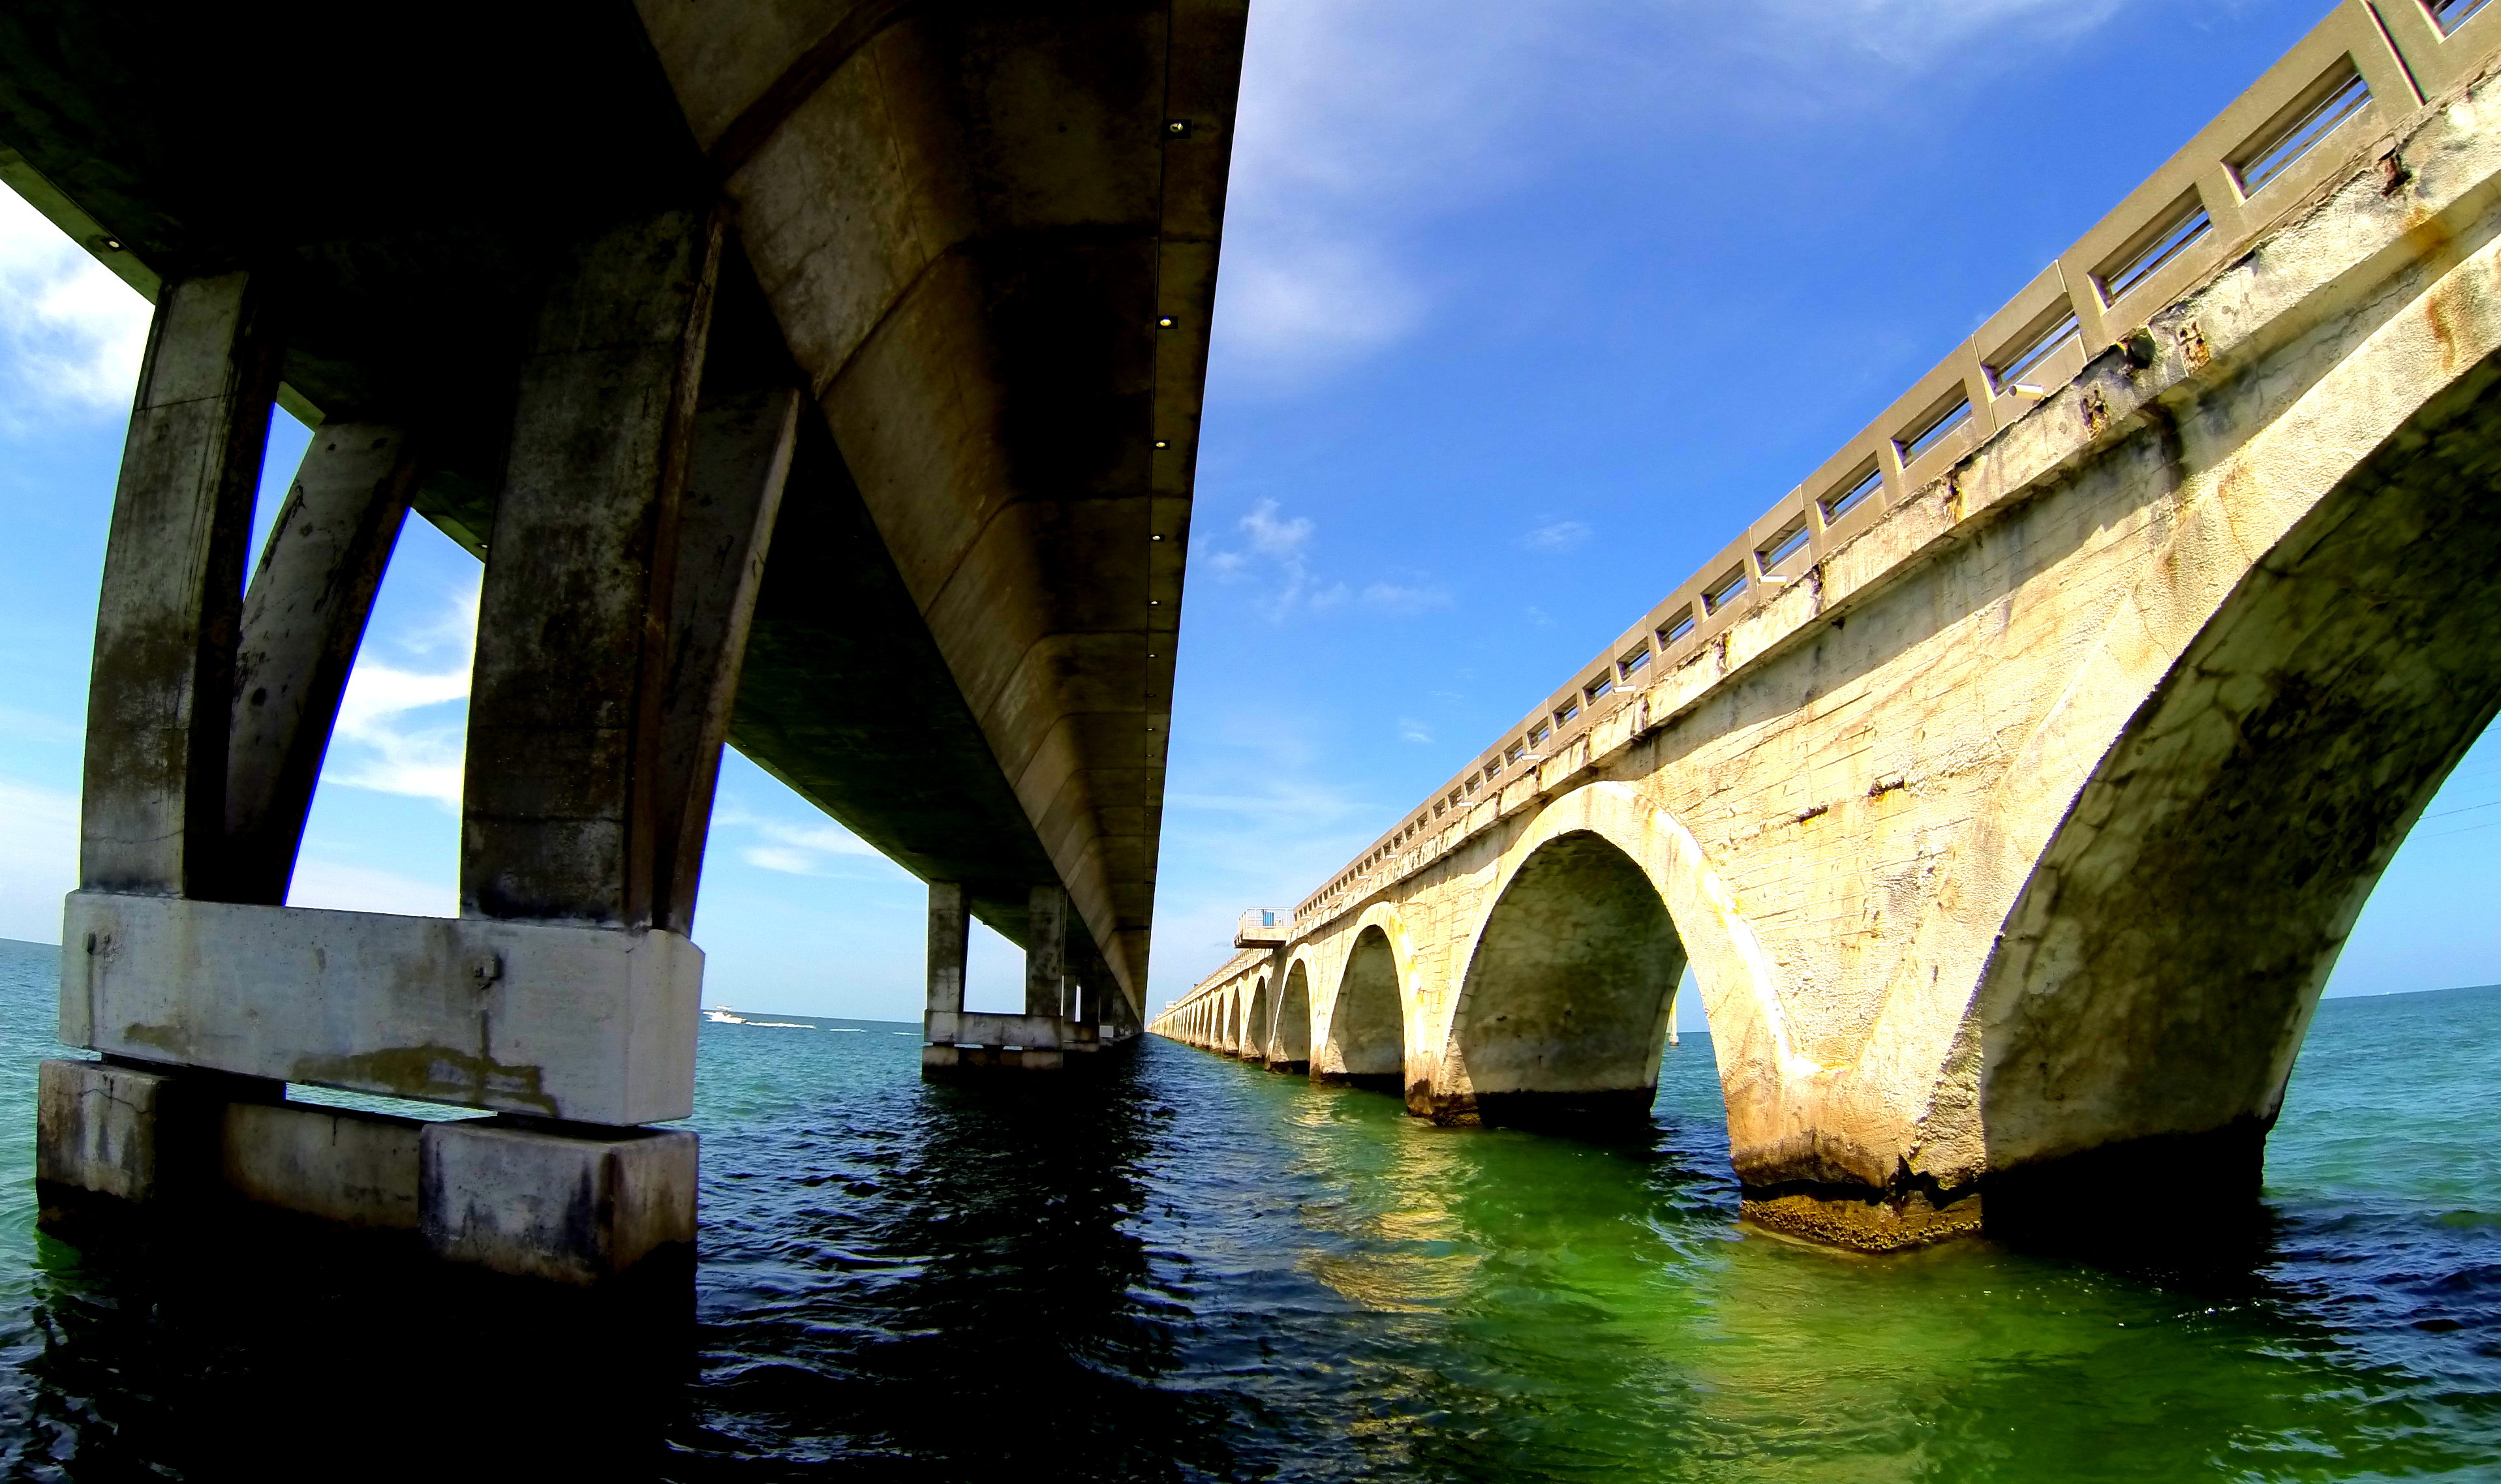 a picture from the water under on of the many bridges than run along the Florida keys.